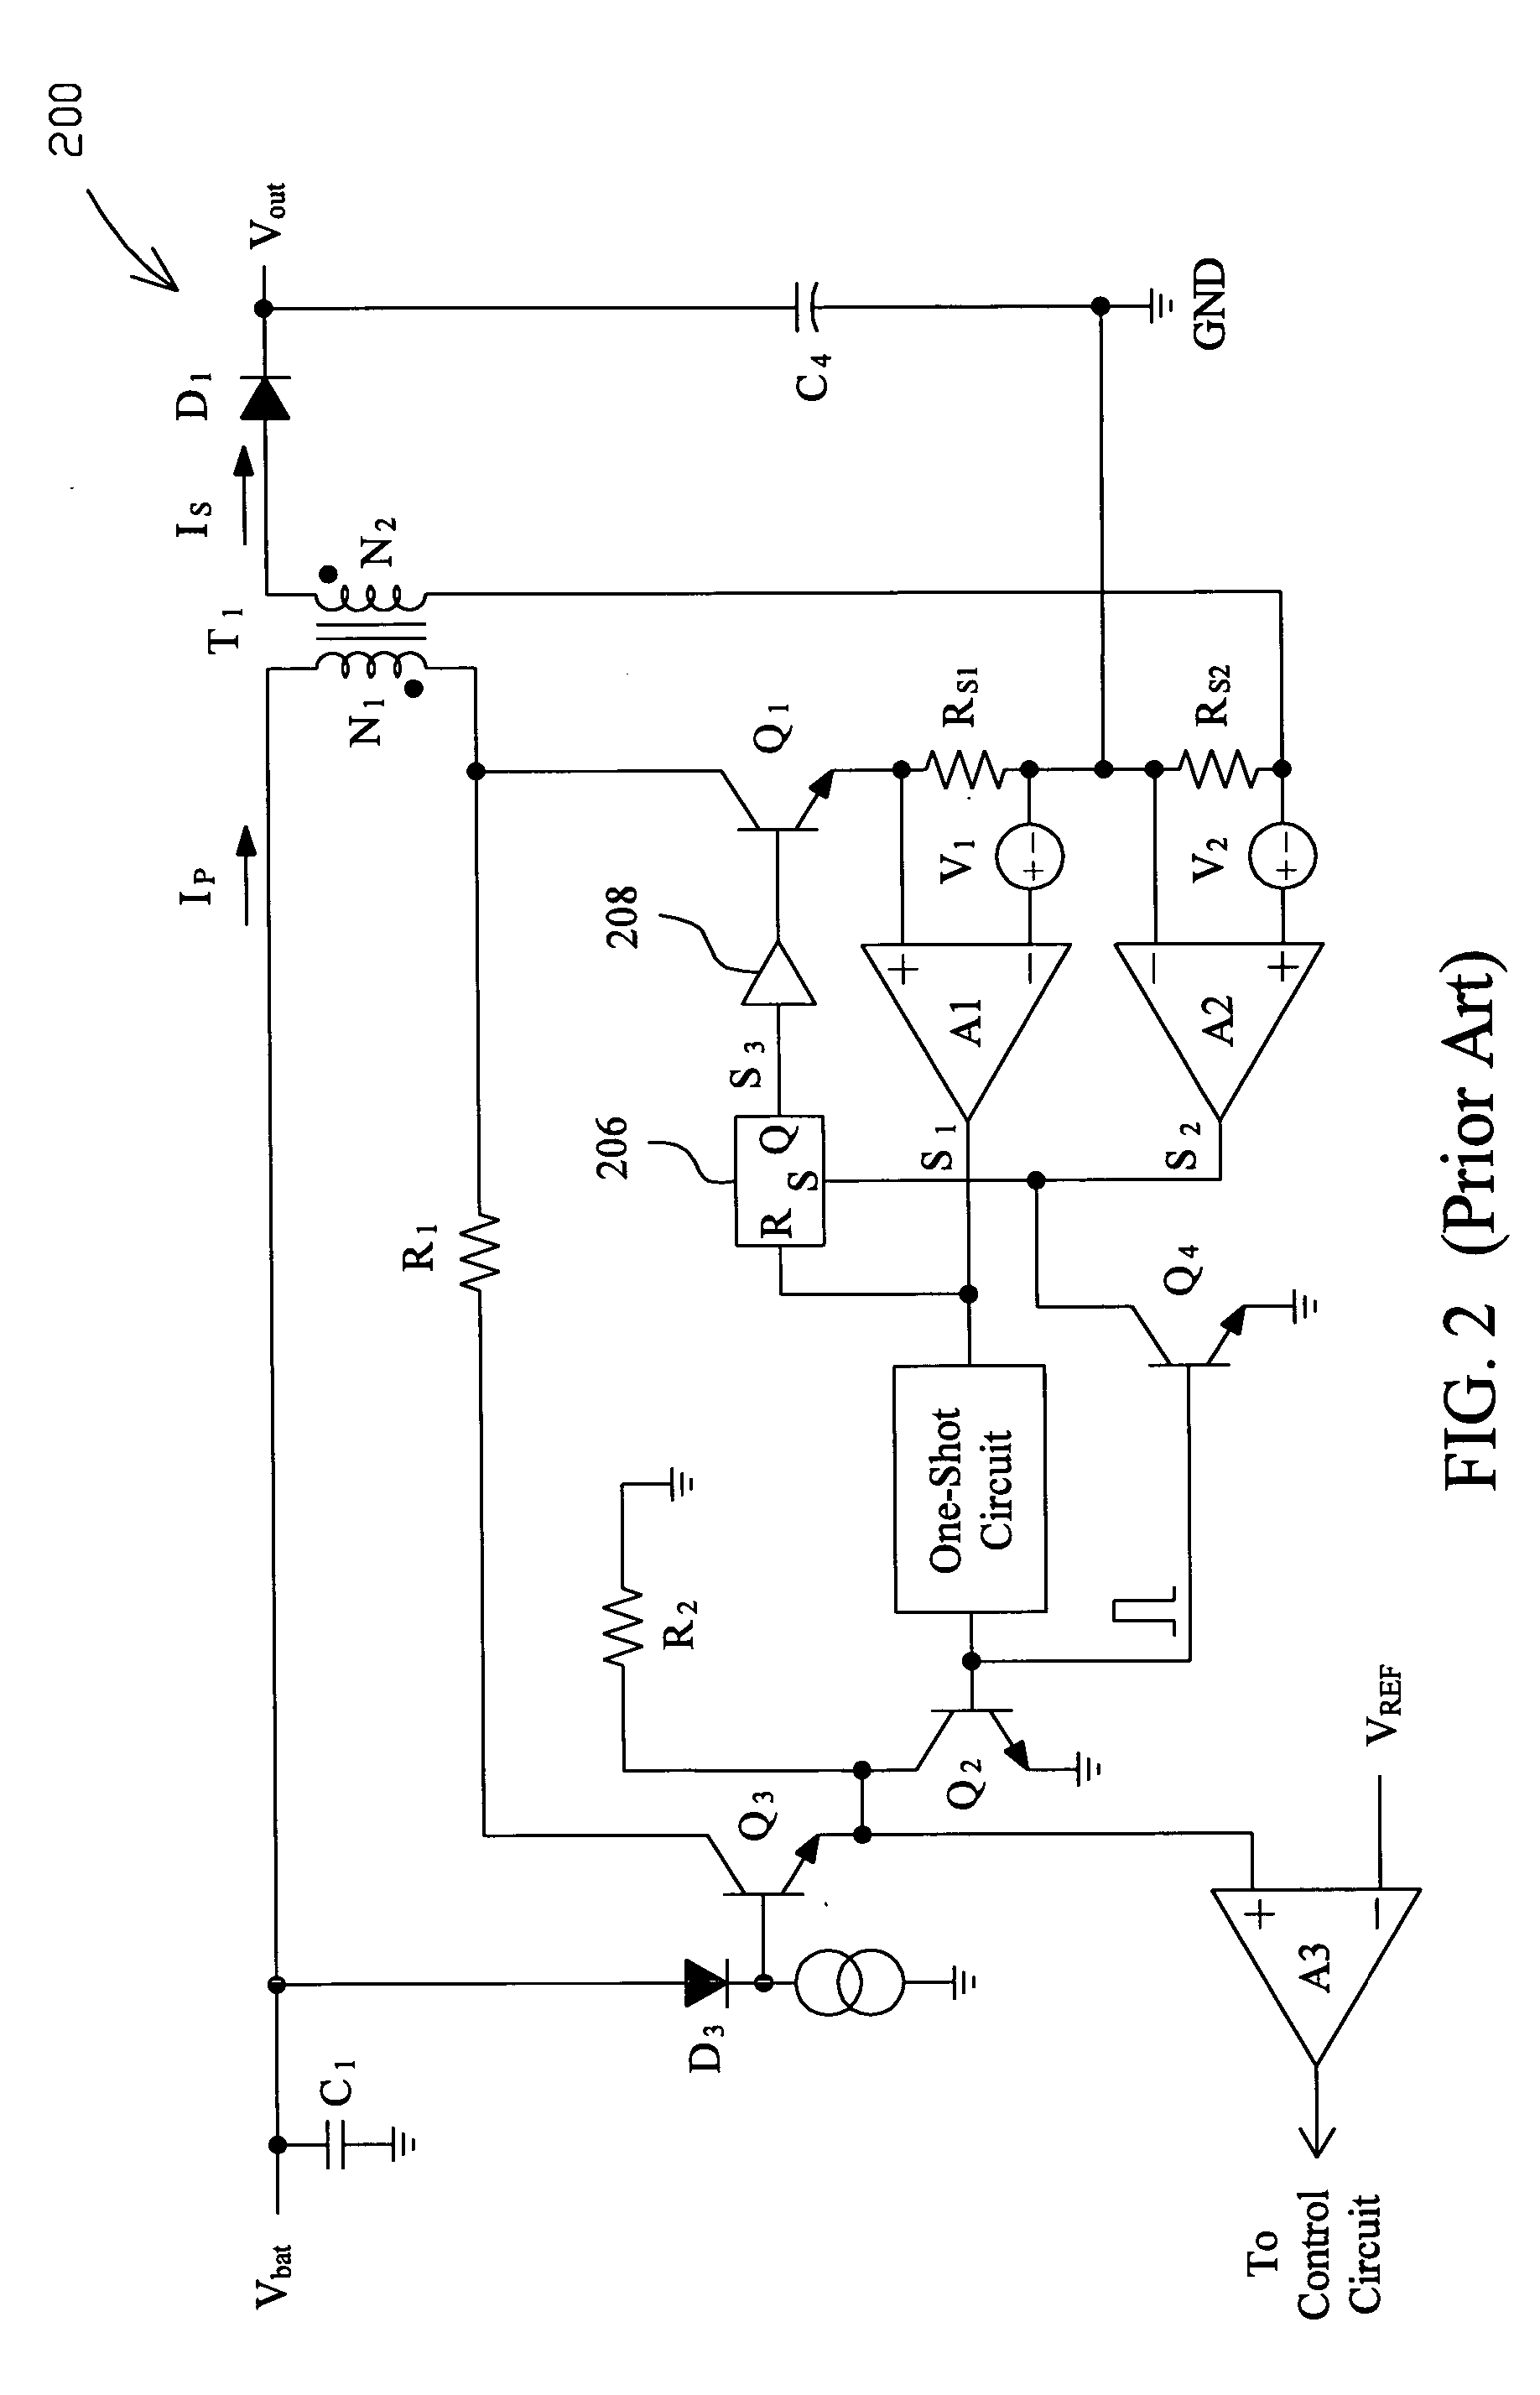 Apparatus and method for constant delta current control in a capacitor charger